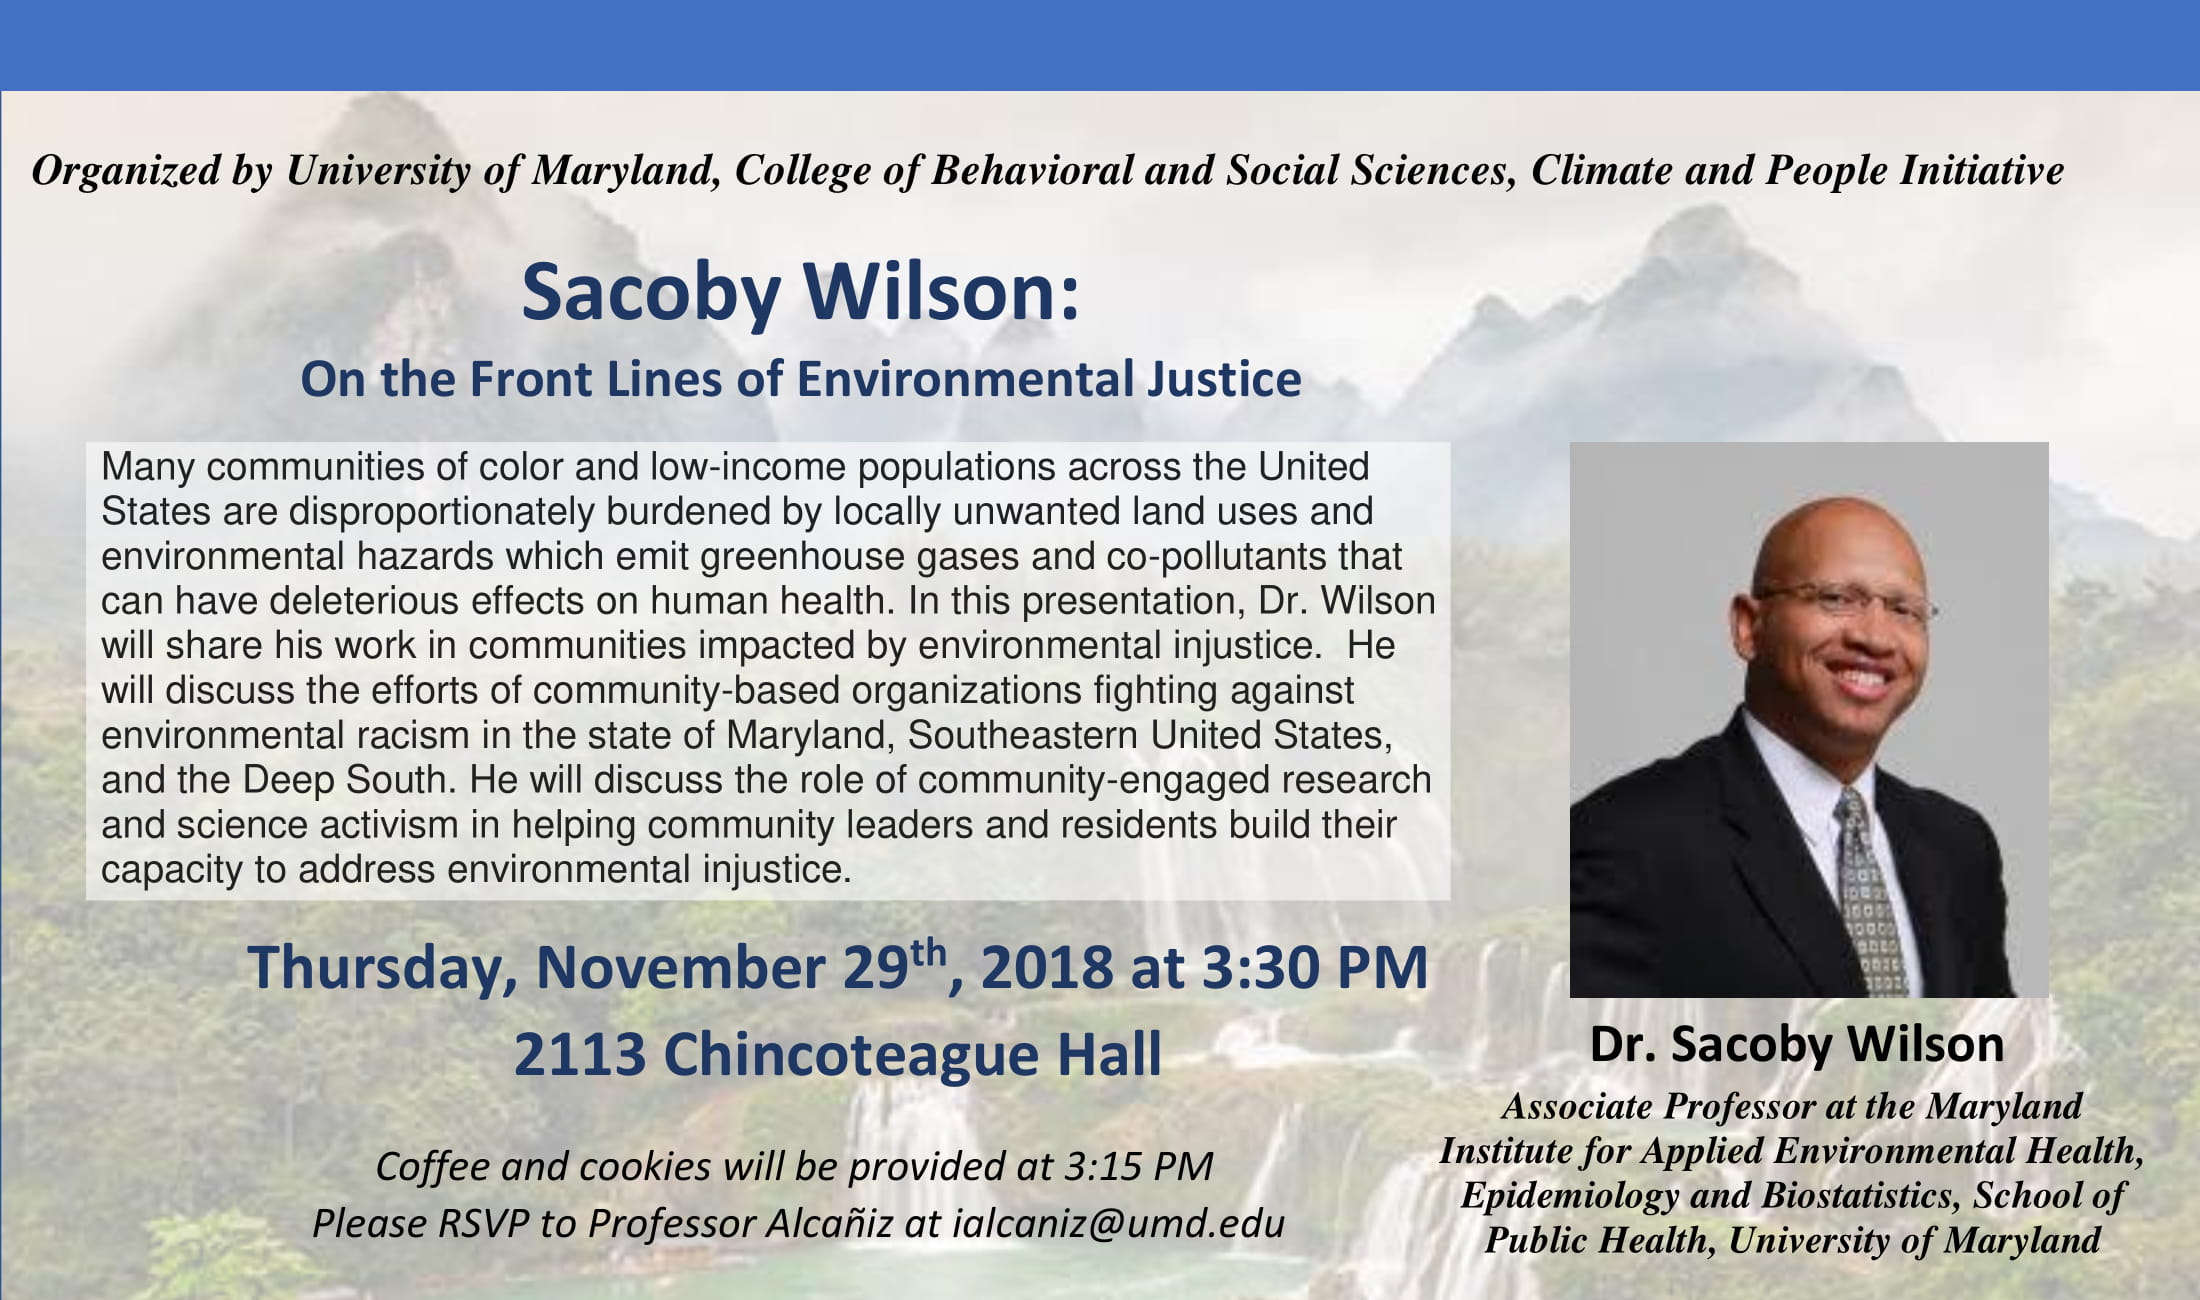 Sacoby Wilson's Seminar: On the Front Lines of Environmental Justice